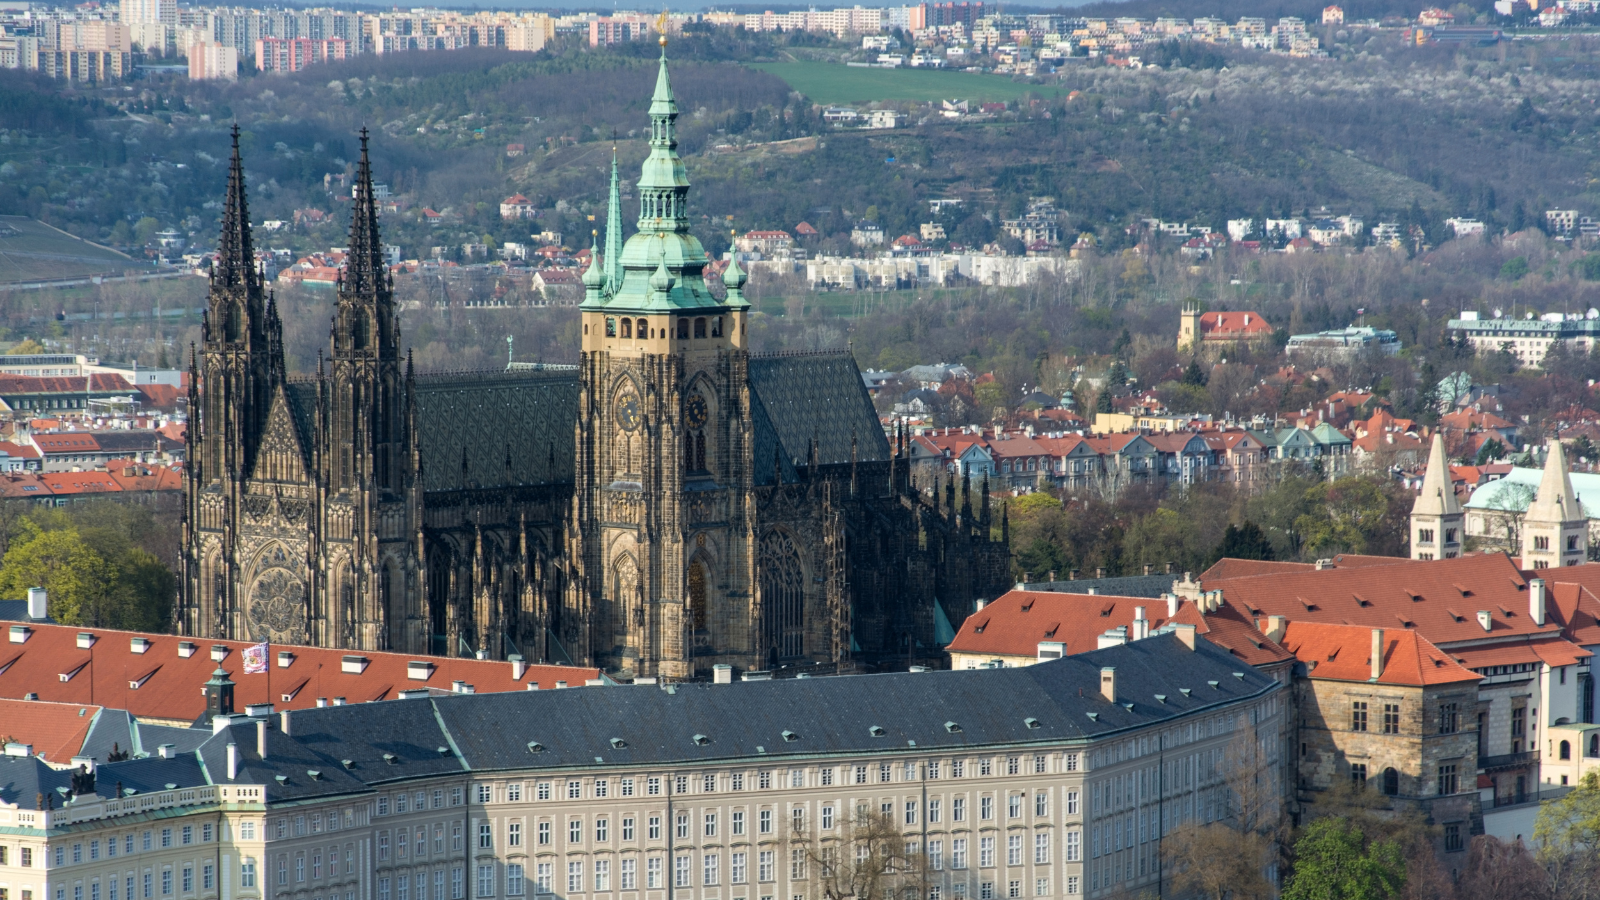 Exploring Prague Castle - second thing in the list of 10 best things to do in the Czech Republic